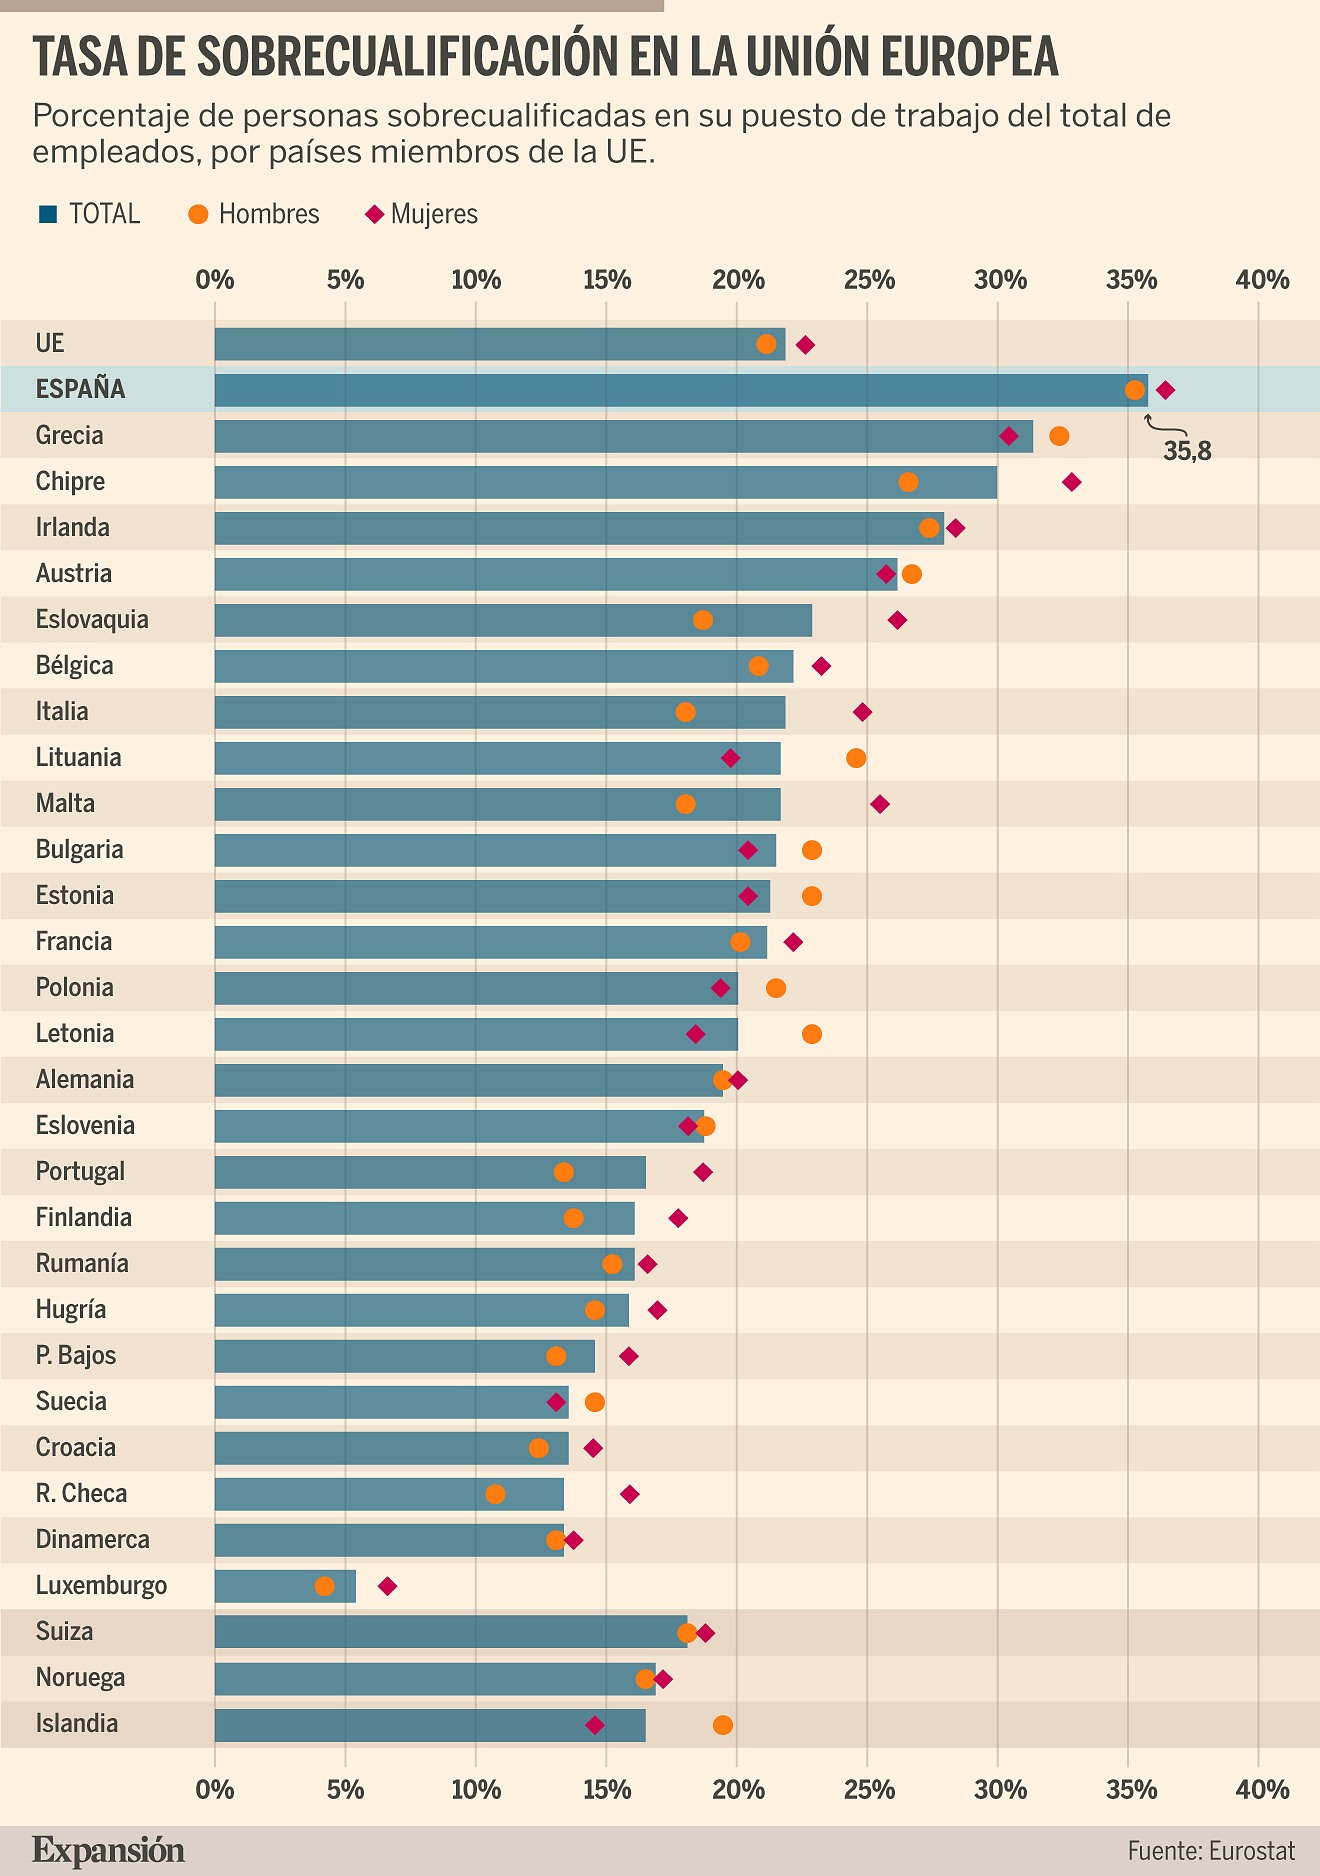 Spain is the country in the European Union with the most overqualified workers for their jobs